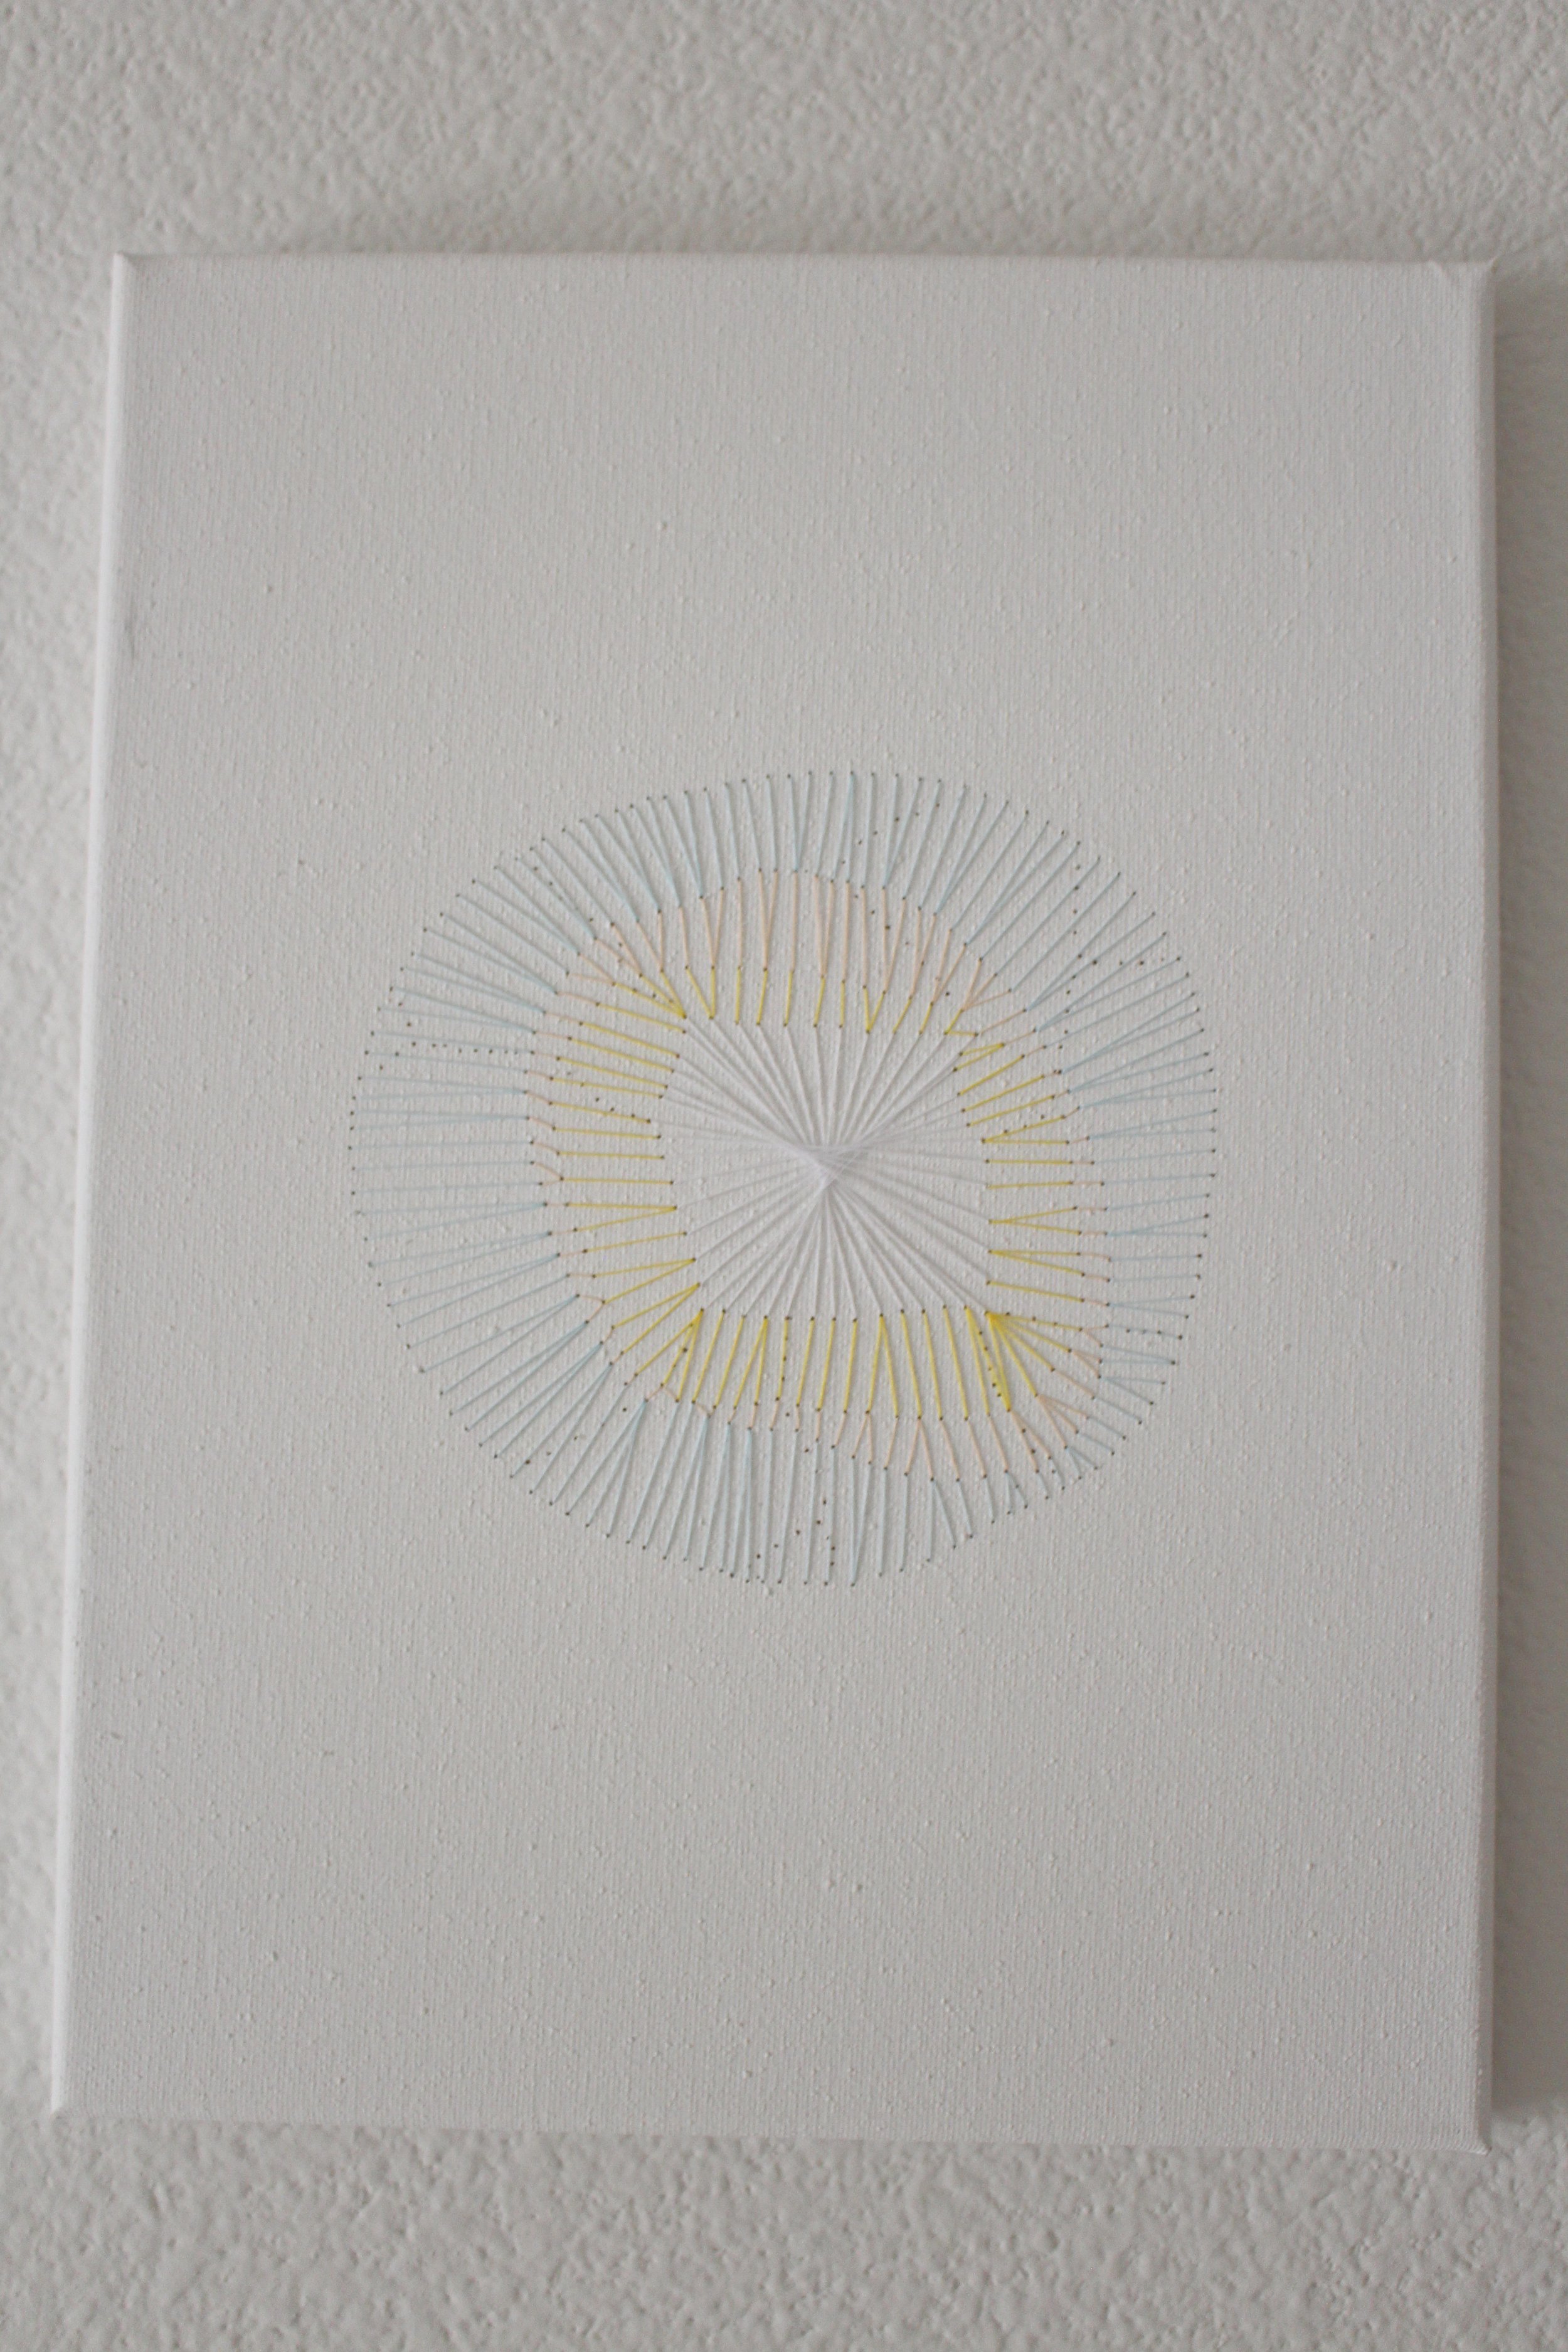  White, yellow, and blue orb sewn into a canvas 